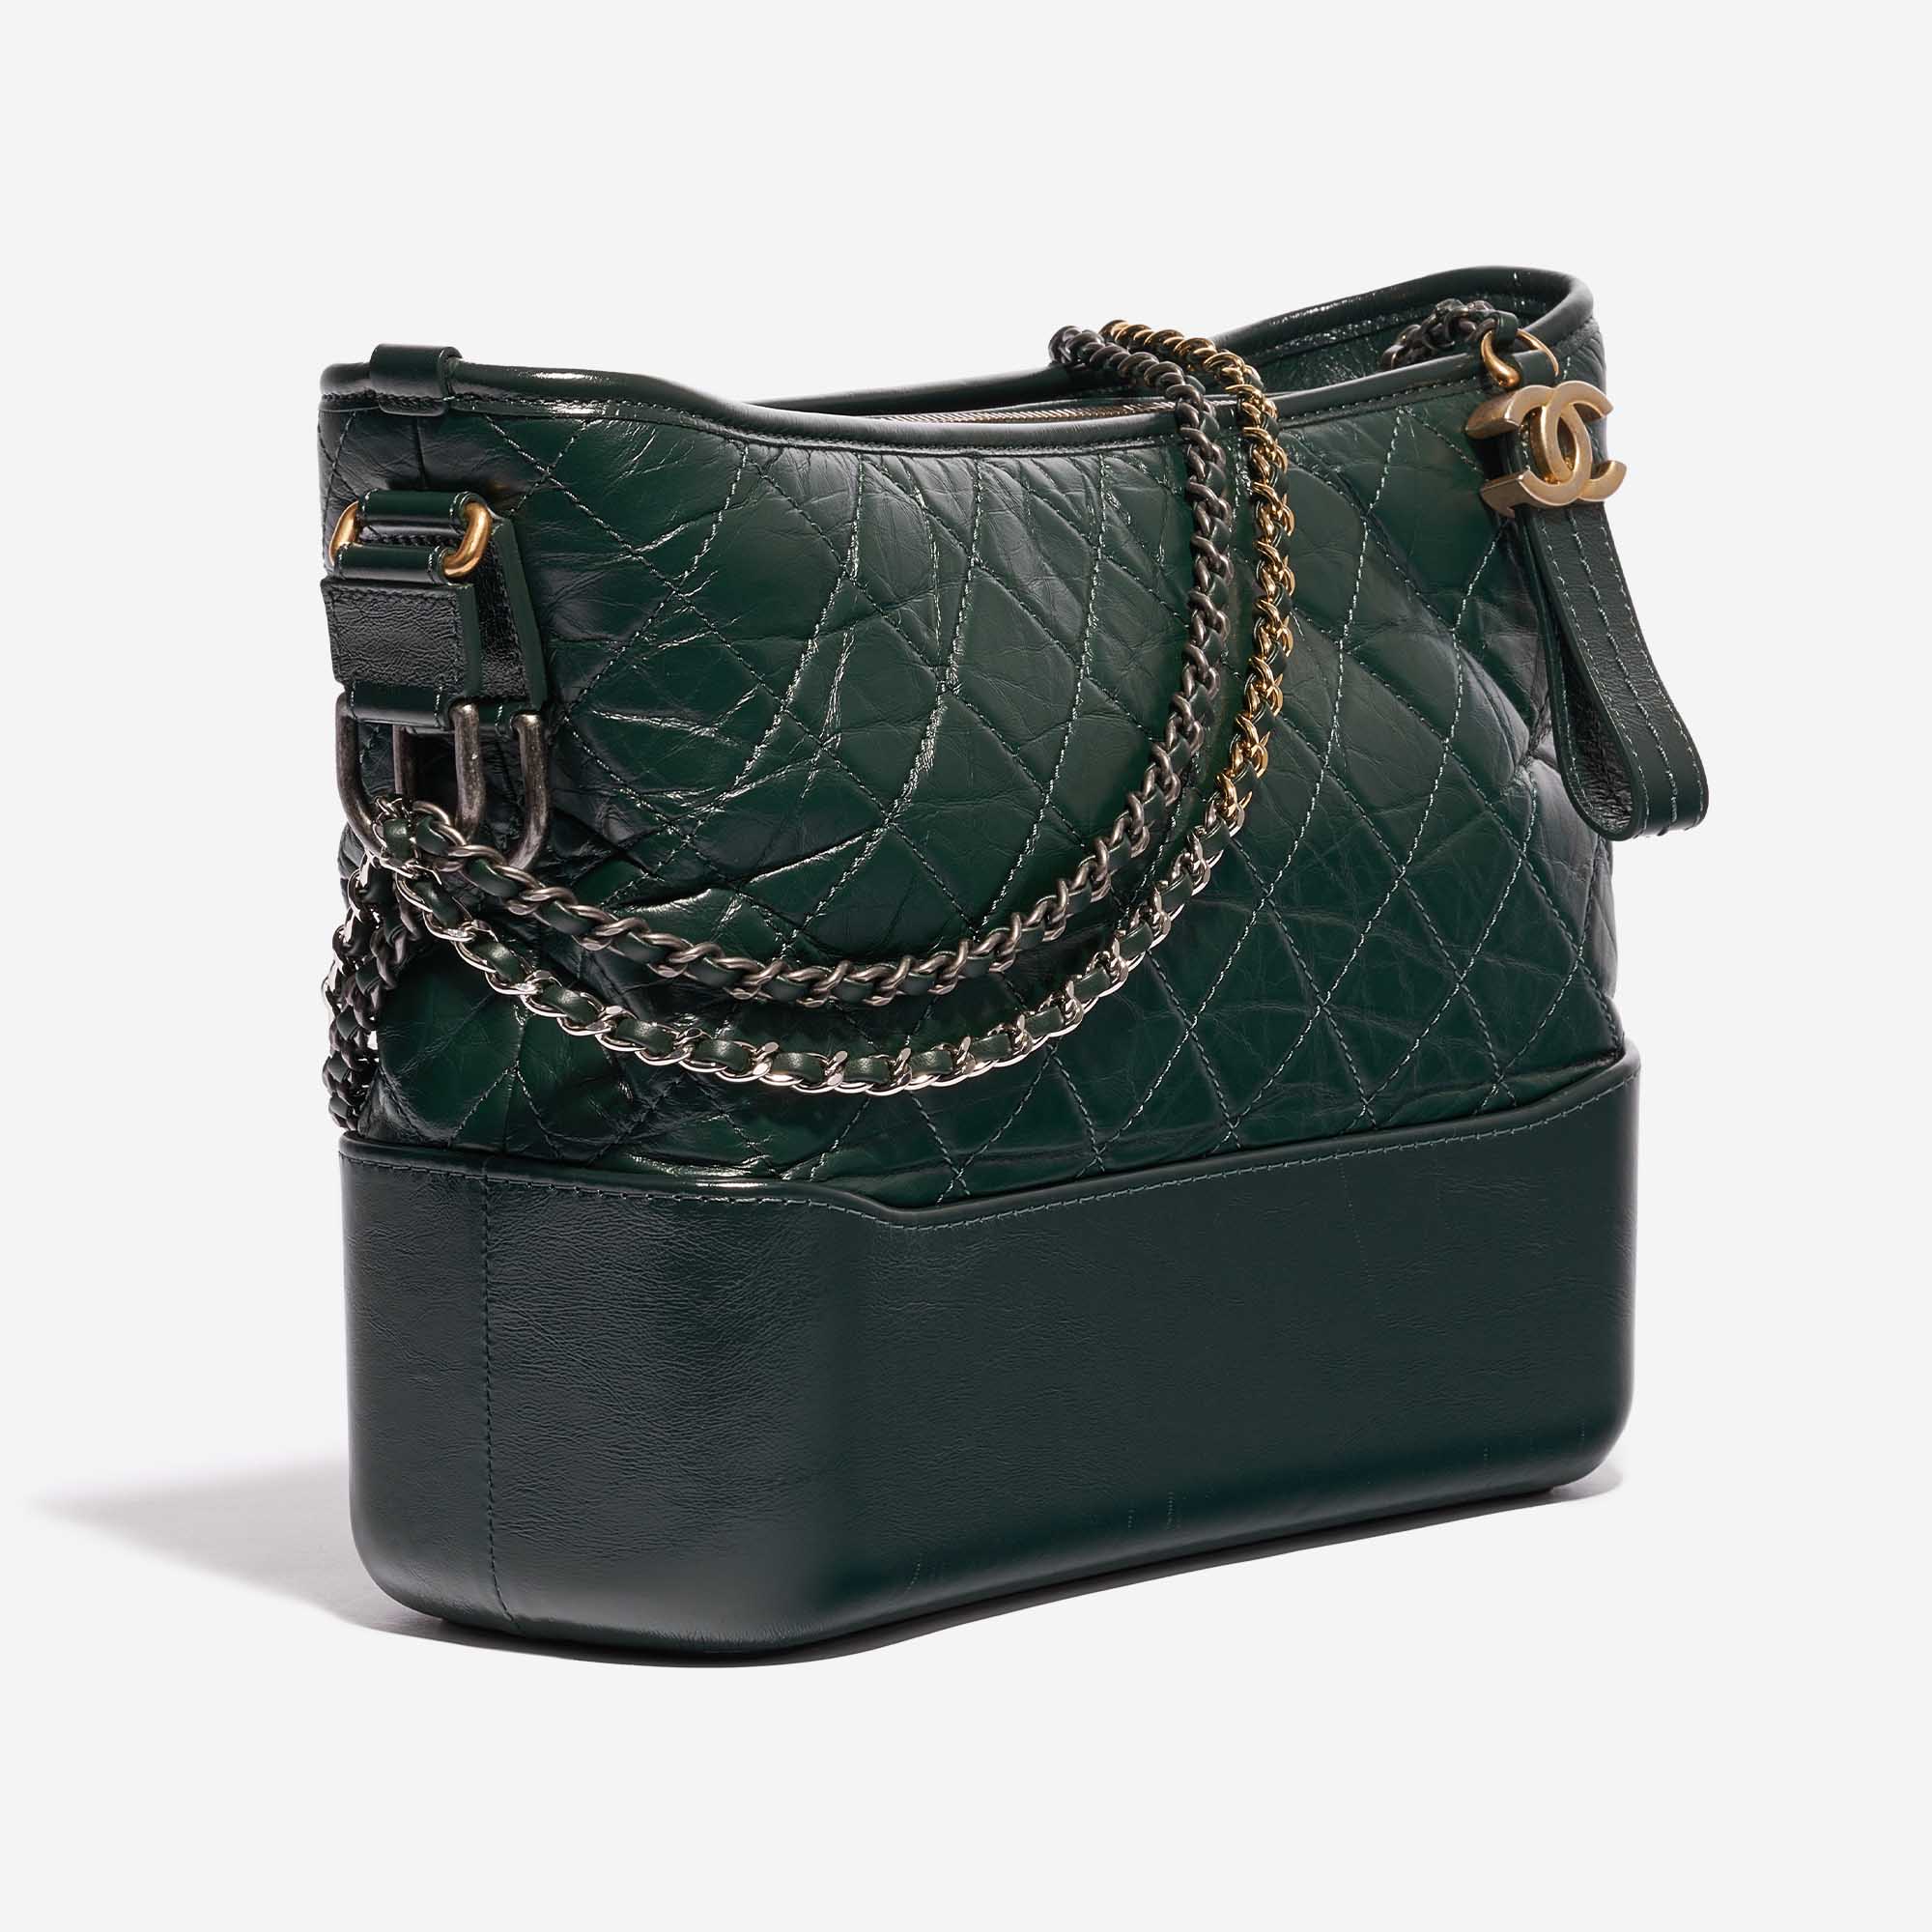 Gabrielle leather crossbody bag Chanel Green in Leather - 21239230